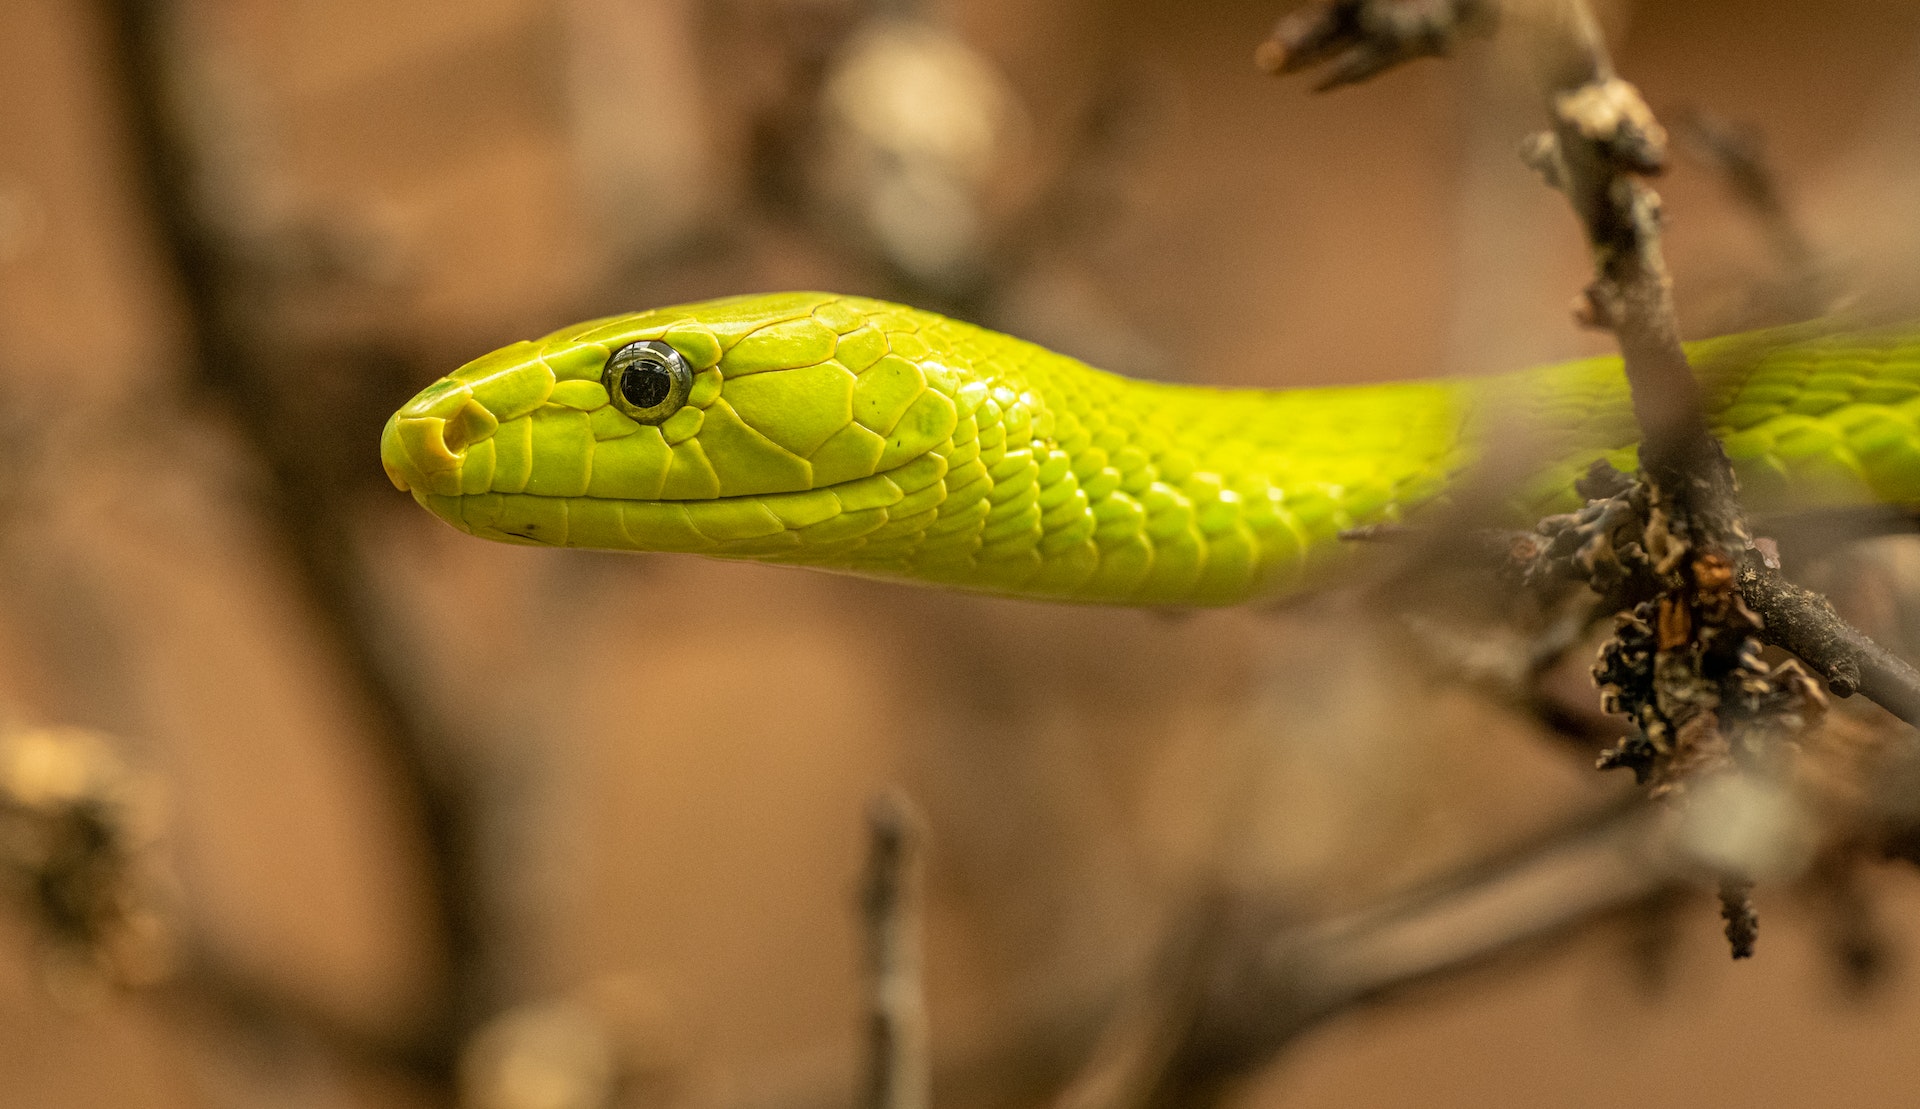 10 Fascinating Facts About Snakes You Never Knew